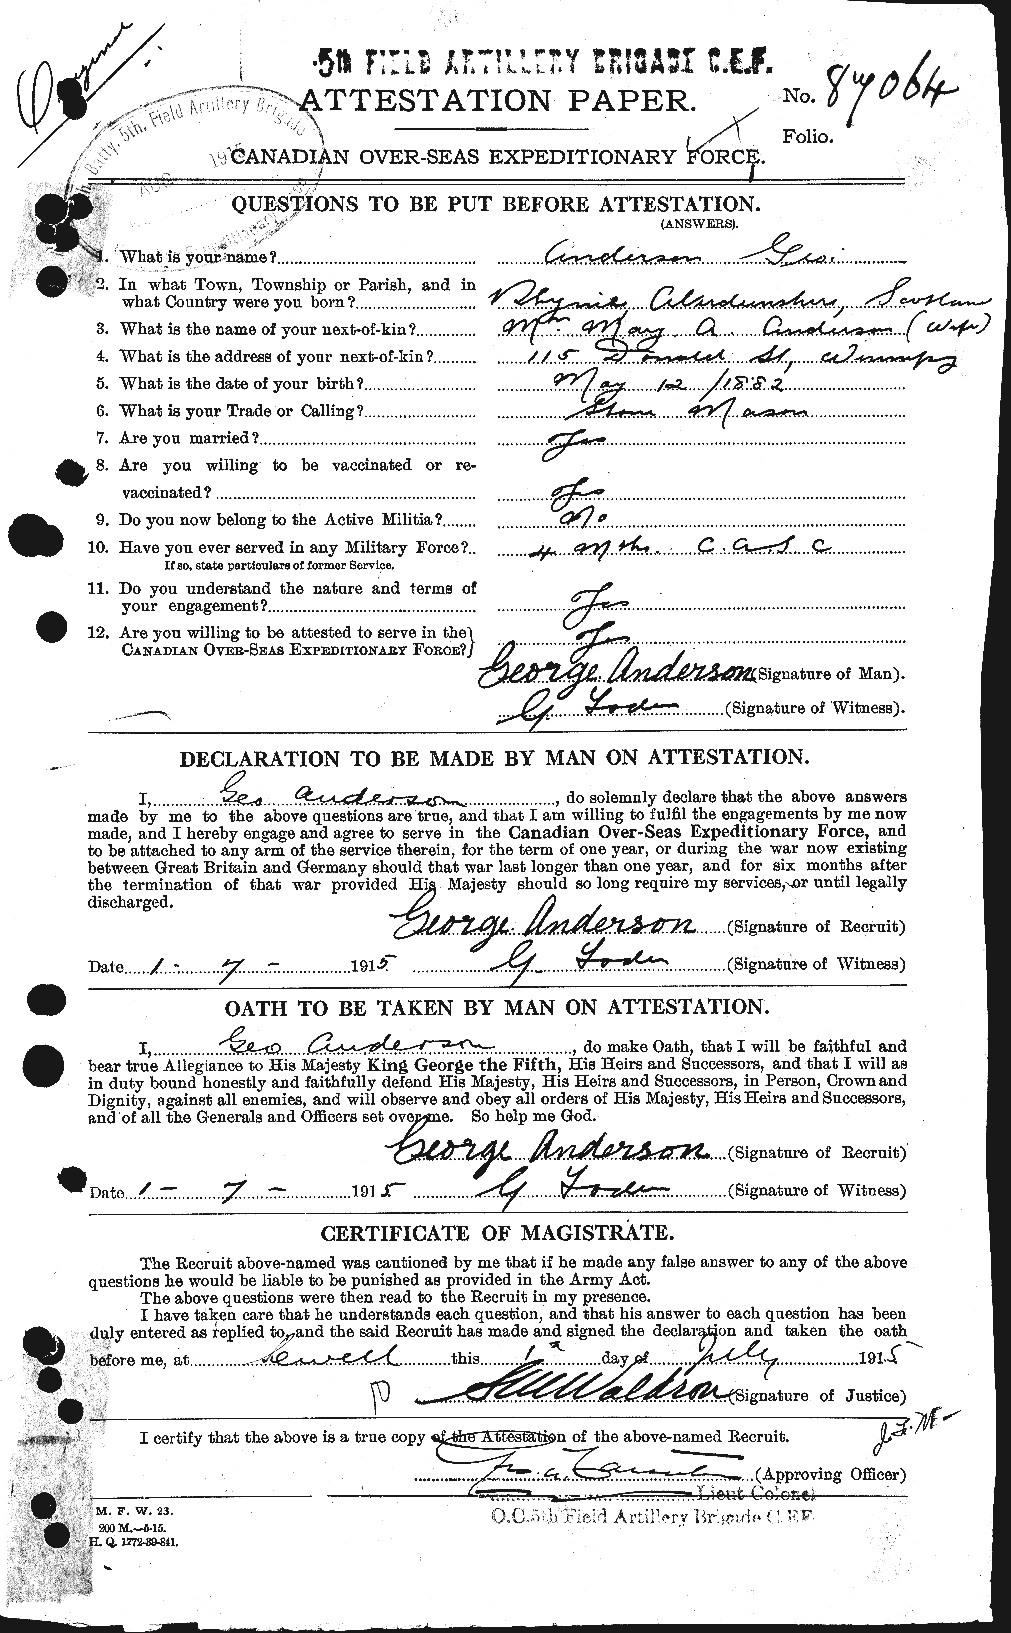 Personnel Records of the First World War - CEF 209789a